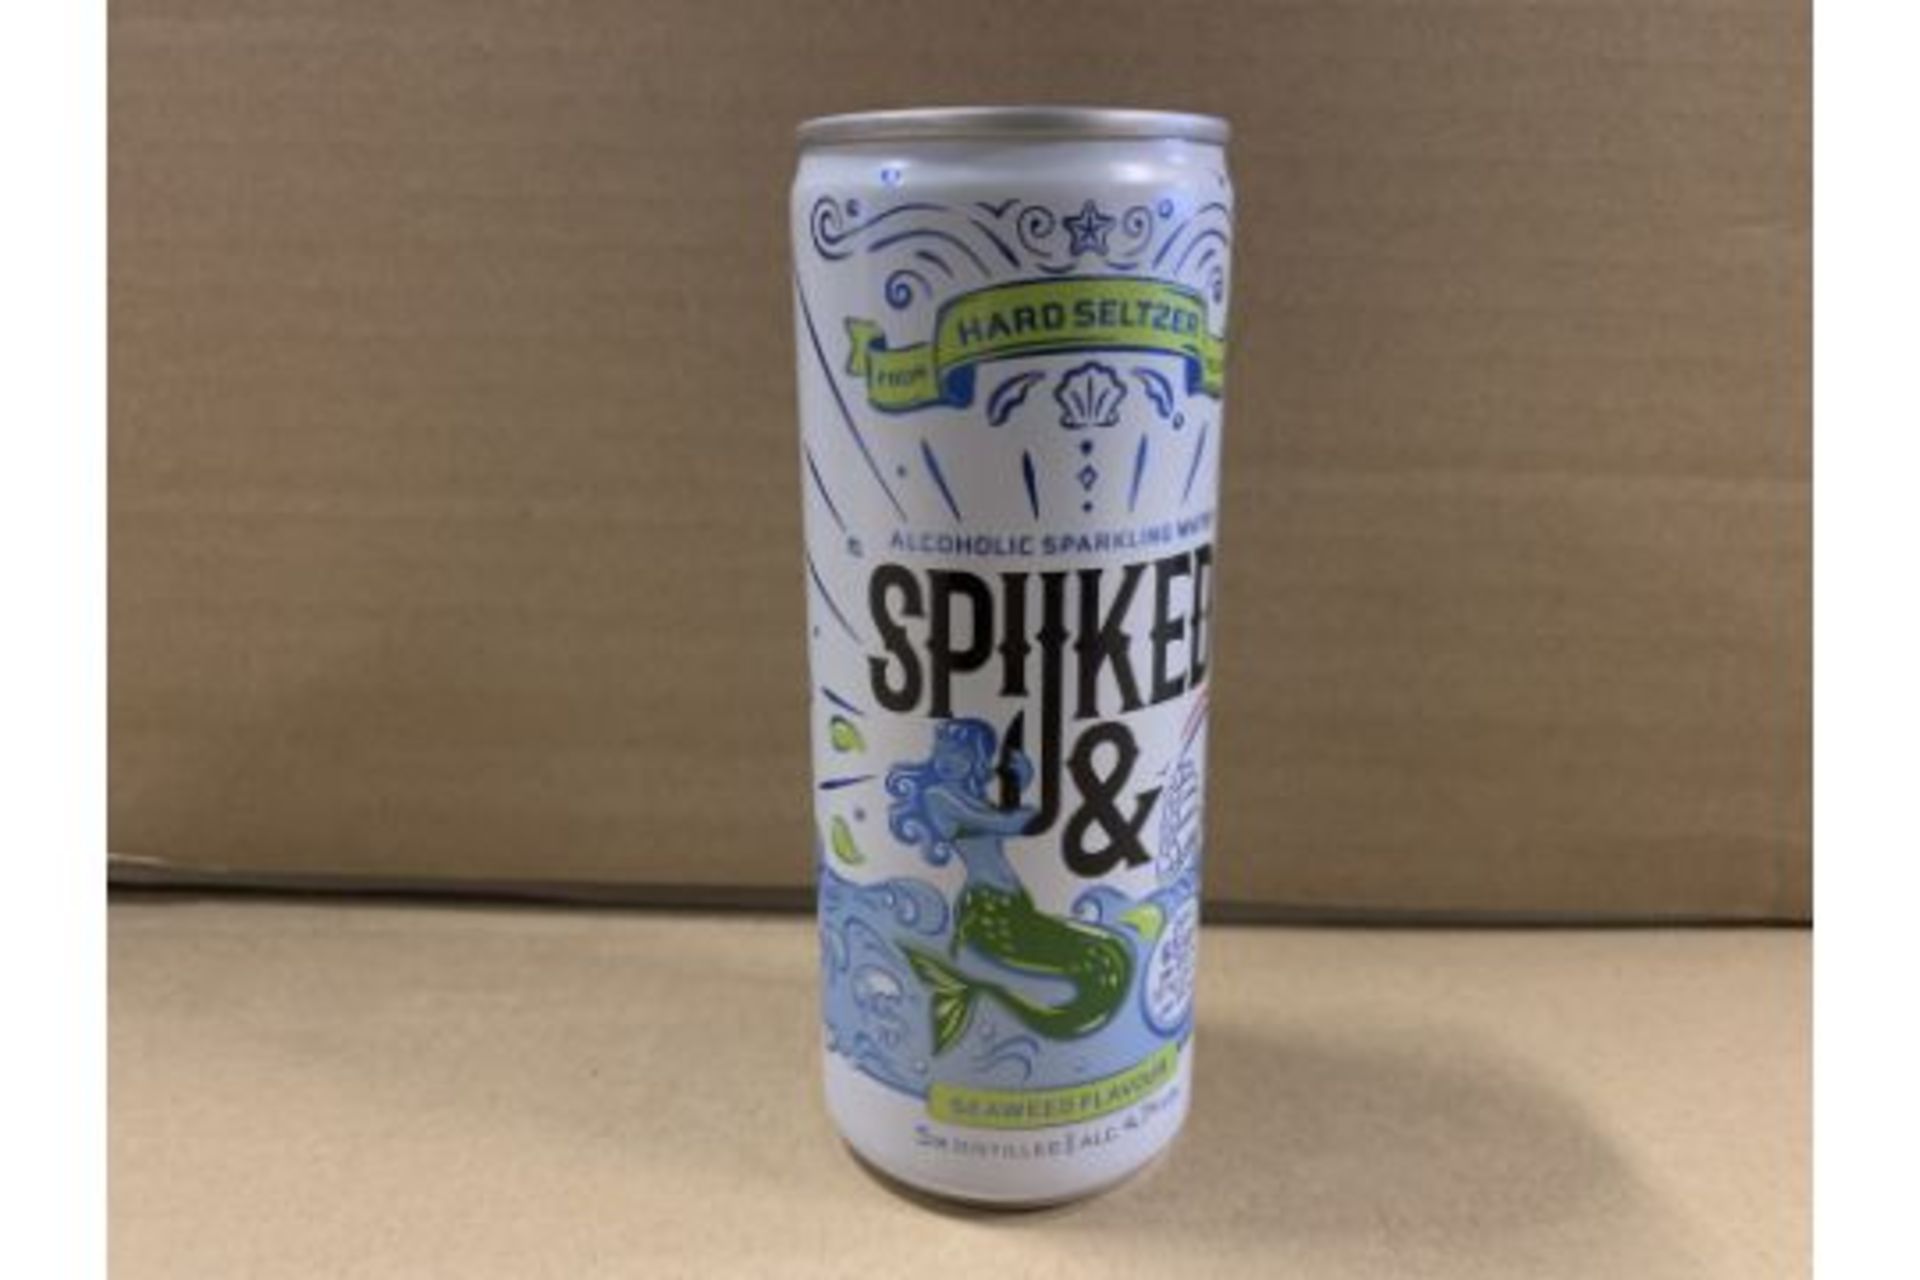 120 X BRAND NEW 250ML CANS OF SEAWEED FLAVOUR ALCOHOLIC SPARKLING WATER BEST BEFORE APRIL 2022 S2